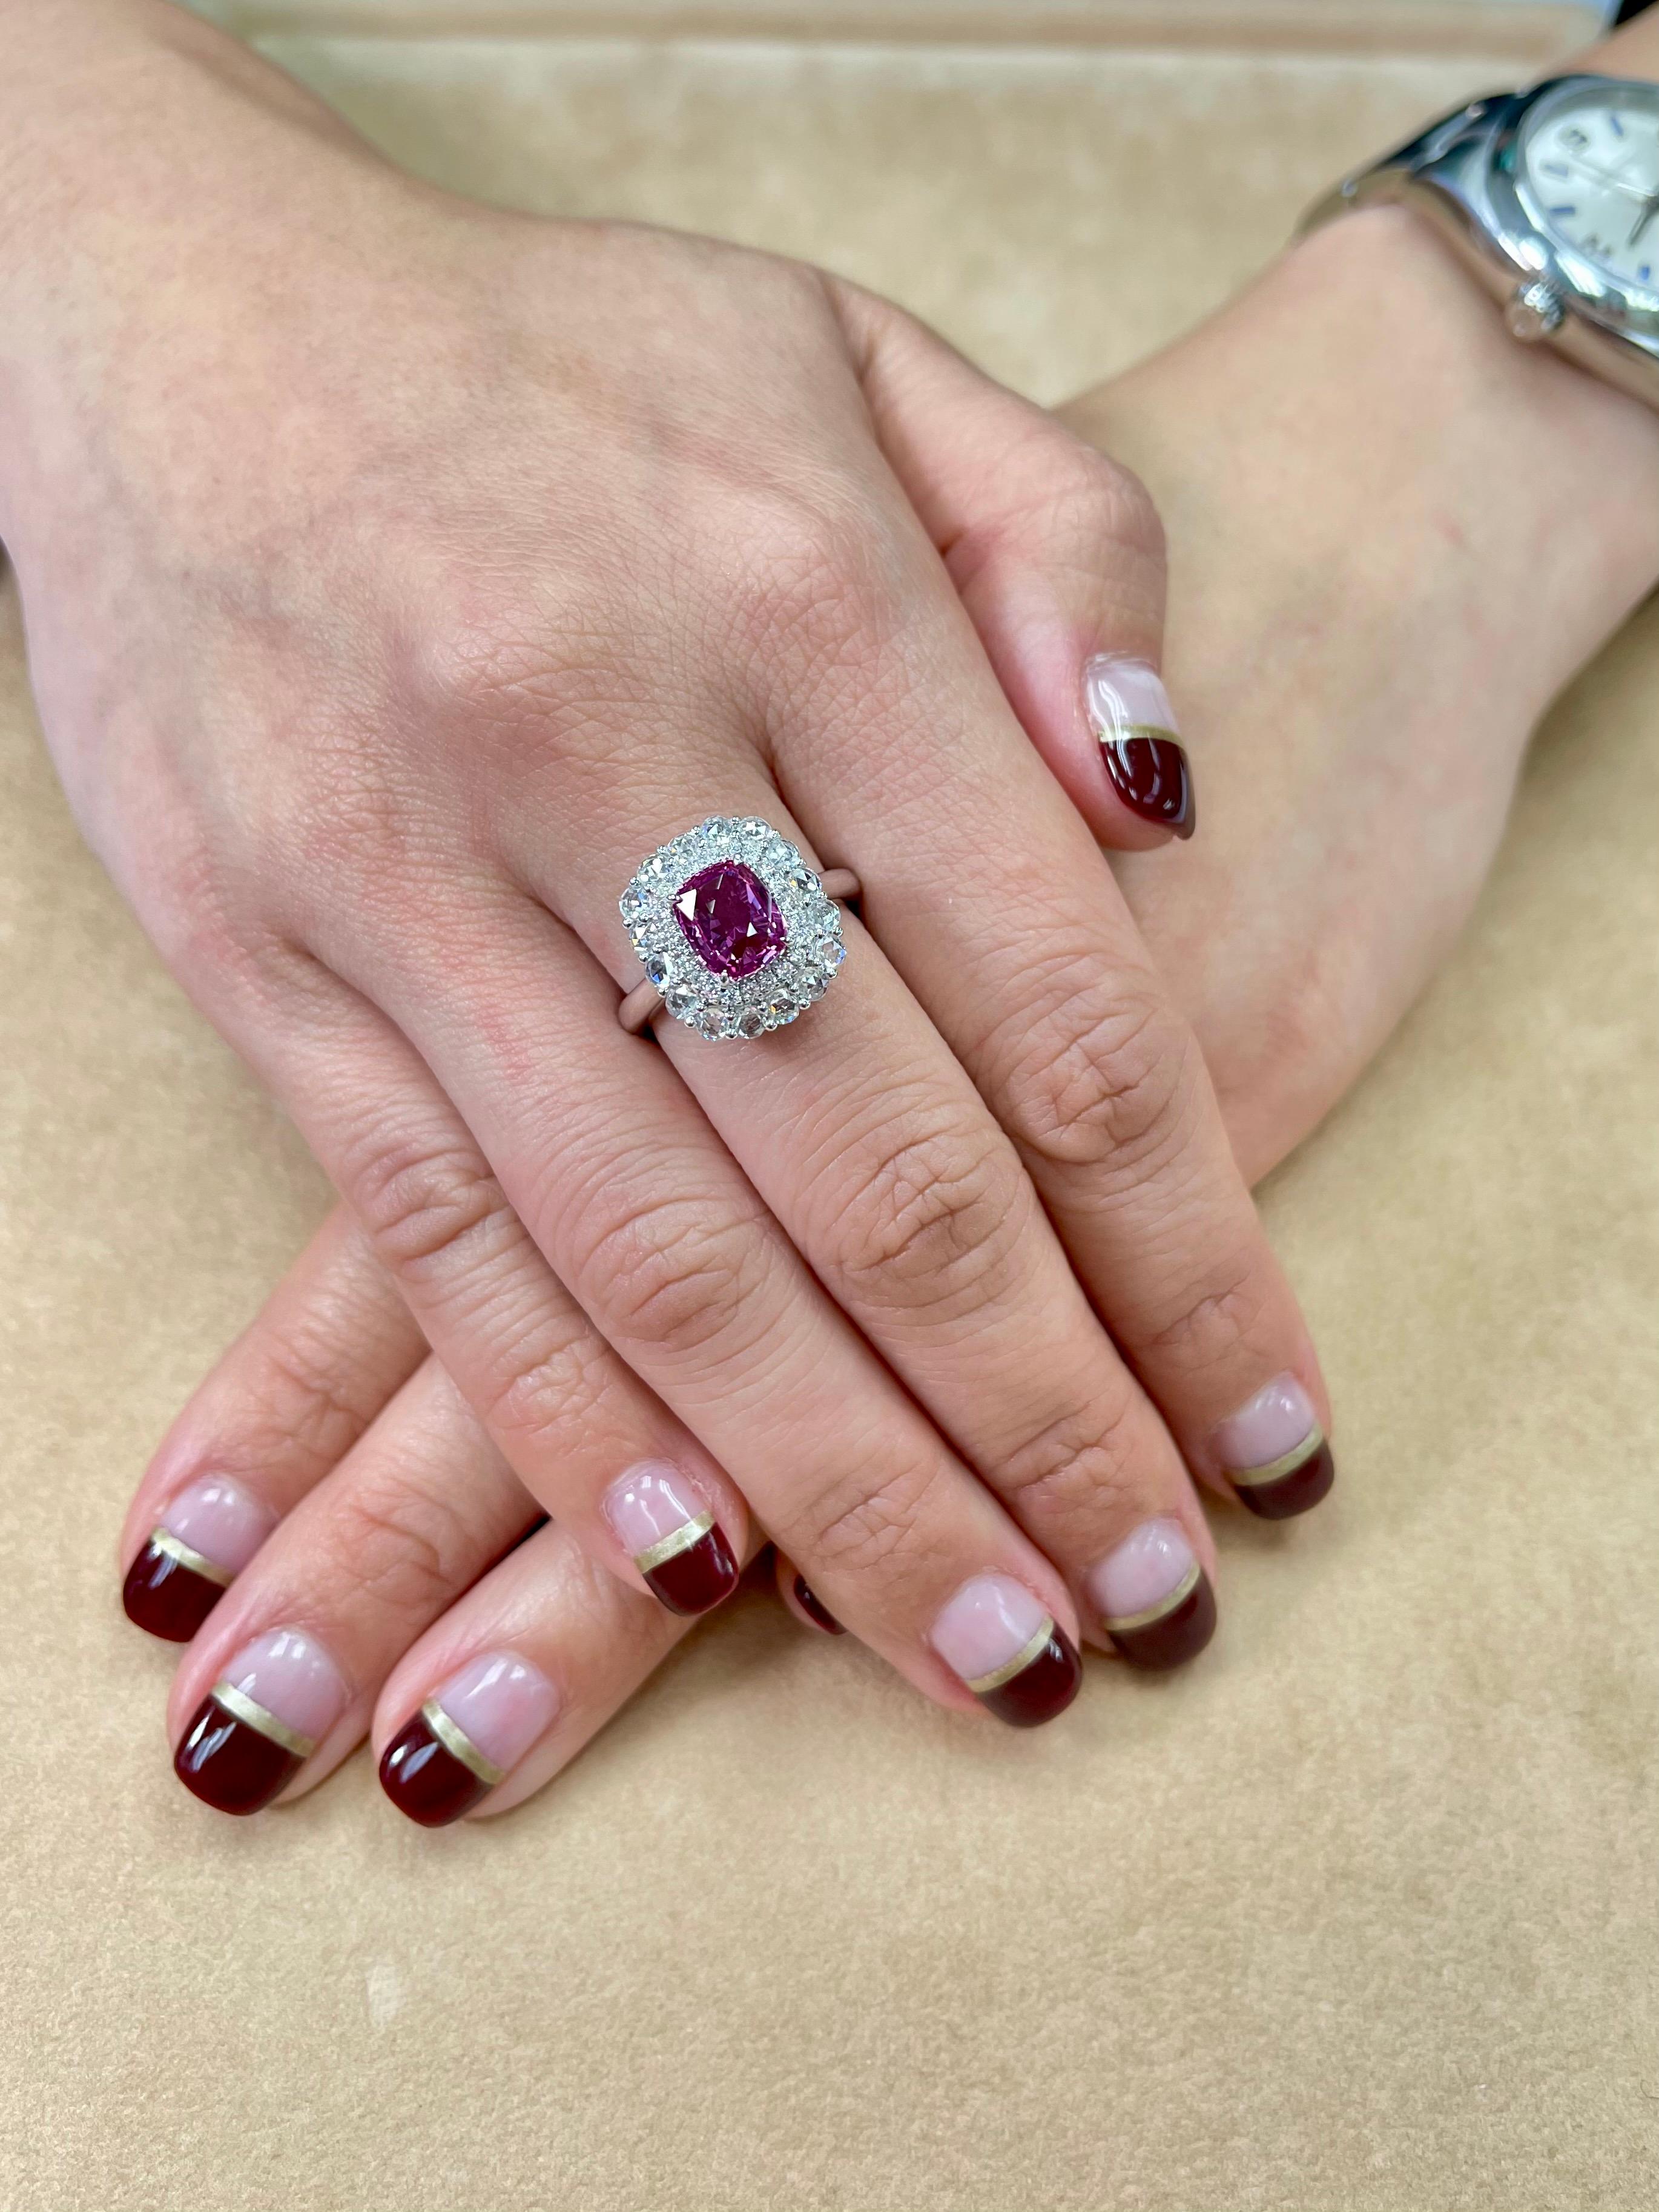 Please check out the HD video! 99% of all pink sapphires are heat treated to improve the color and clarity but this one is spared from any treatment. We would describe the color of this natural no heat sapphire as vivid pink. The ring is set in 18k